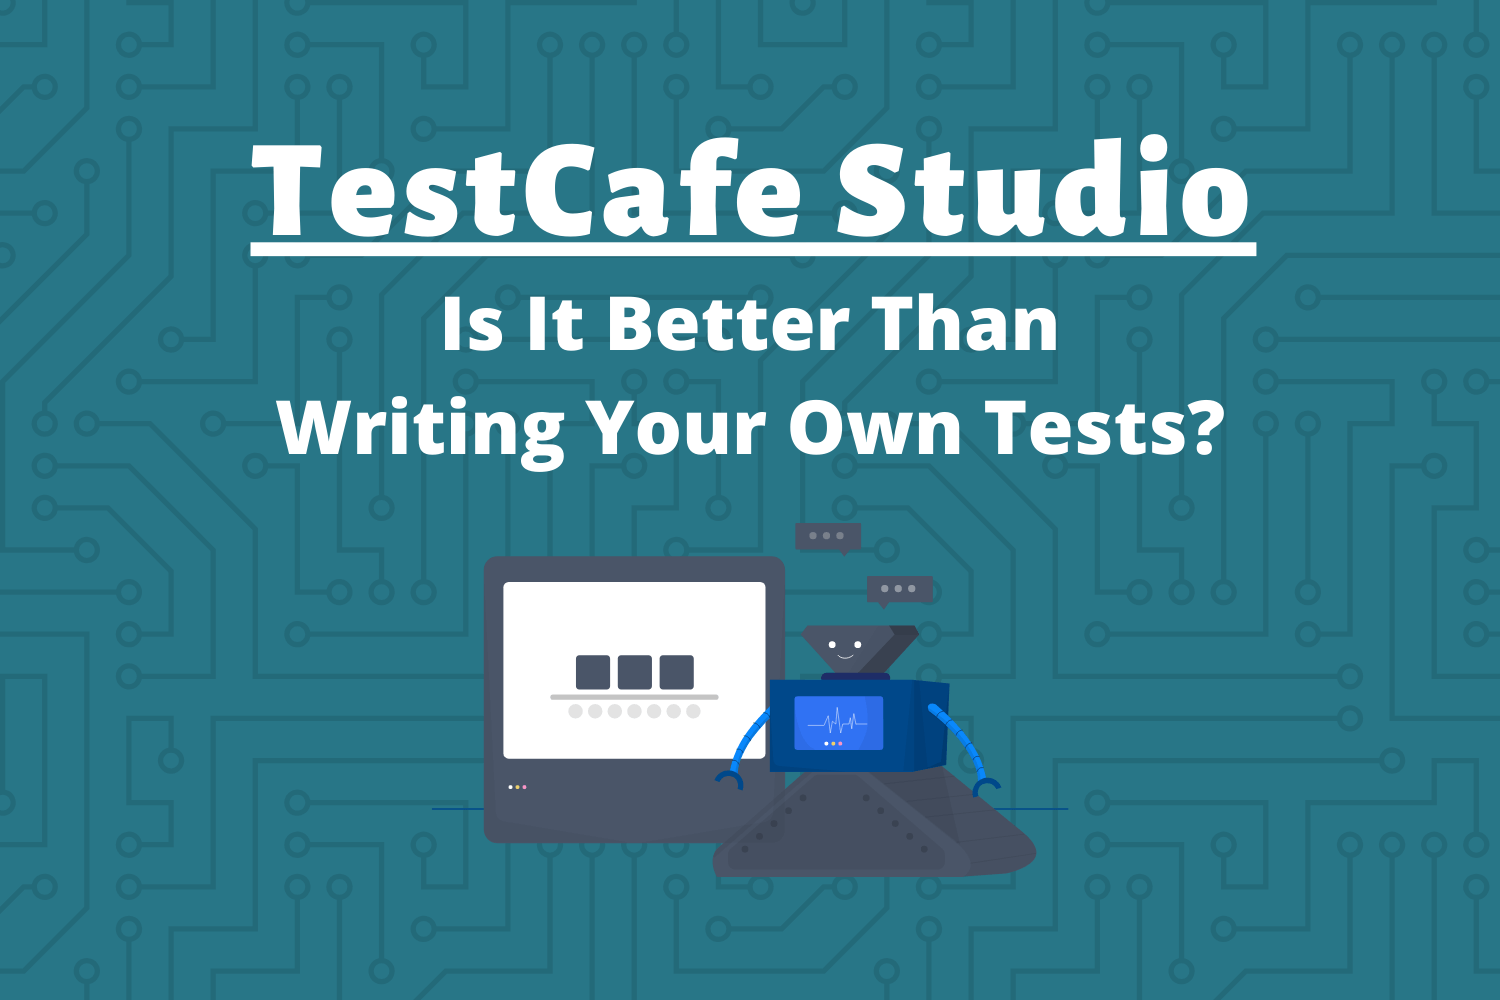 TestCafe Studio: Is It Better Than Writing Your Own Tests?